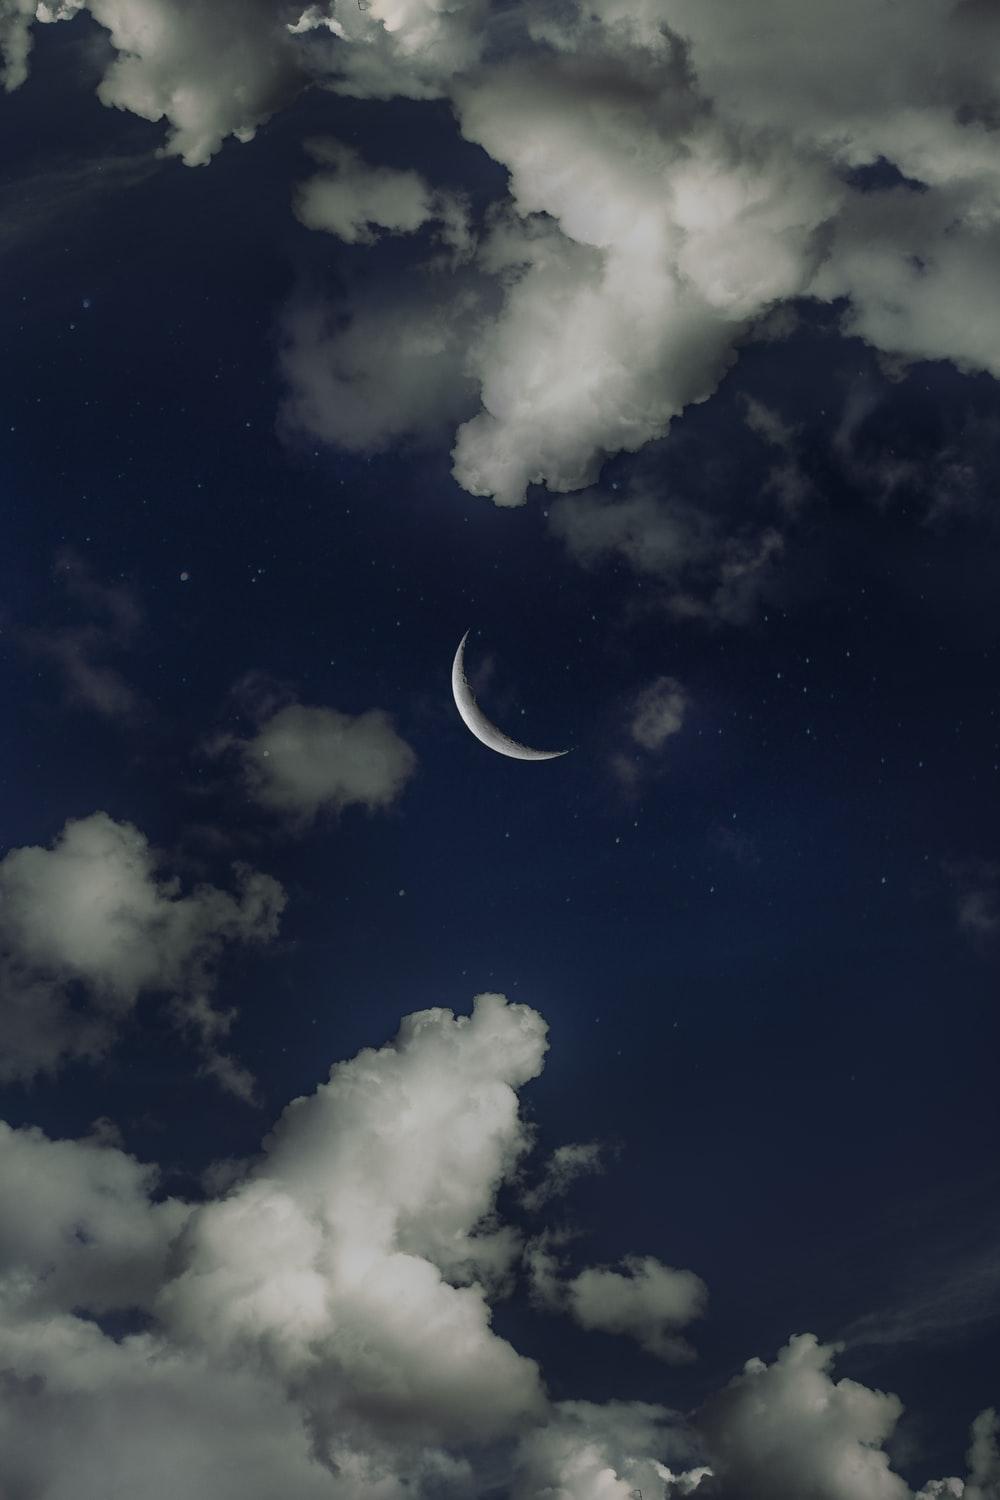 Night Sky with Clouds Wallpapers - Top Free Night Sky with Clouds ...